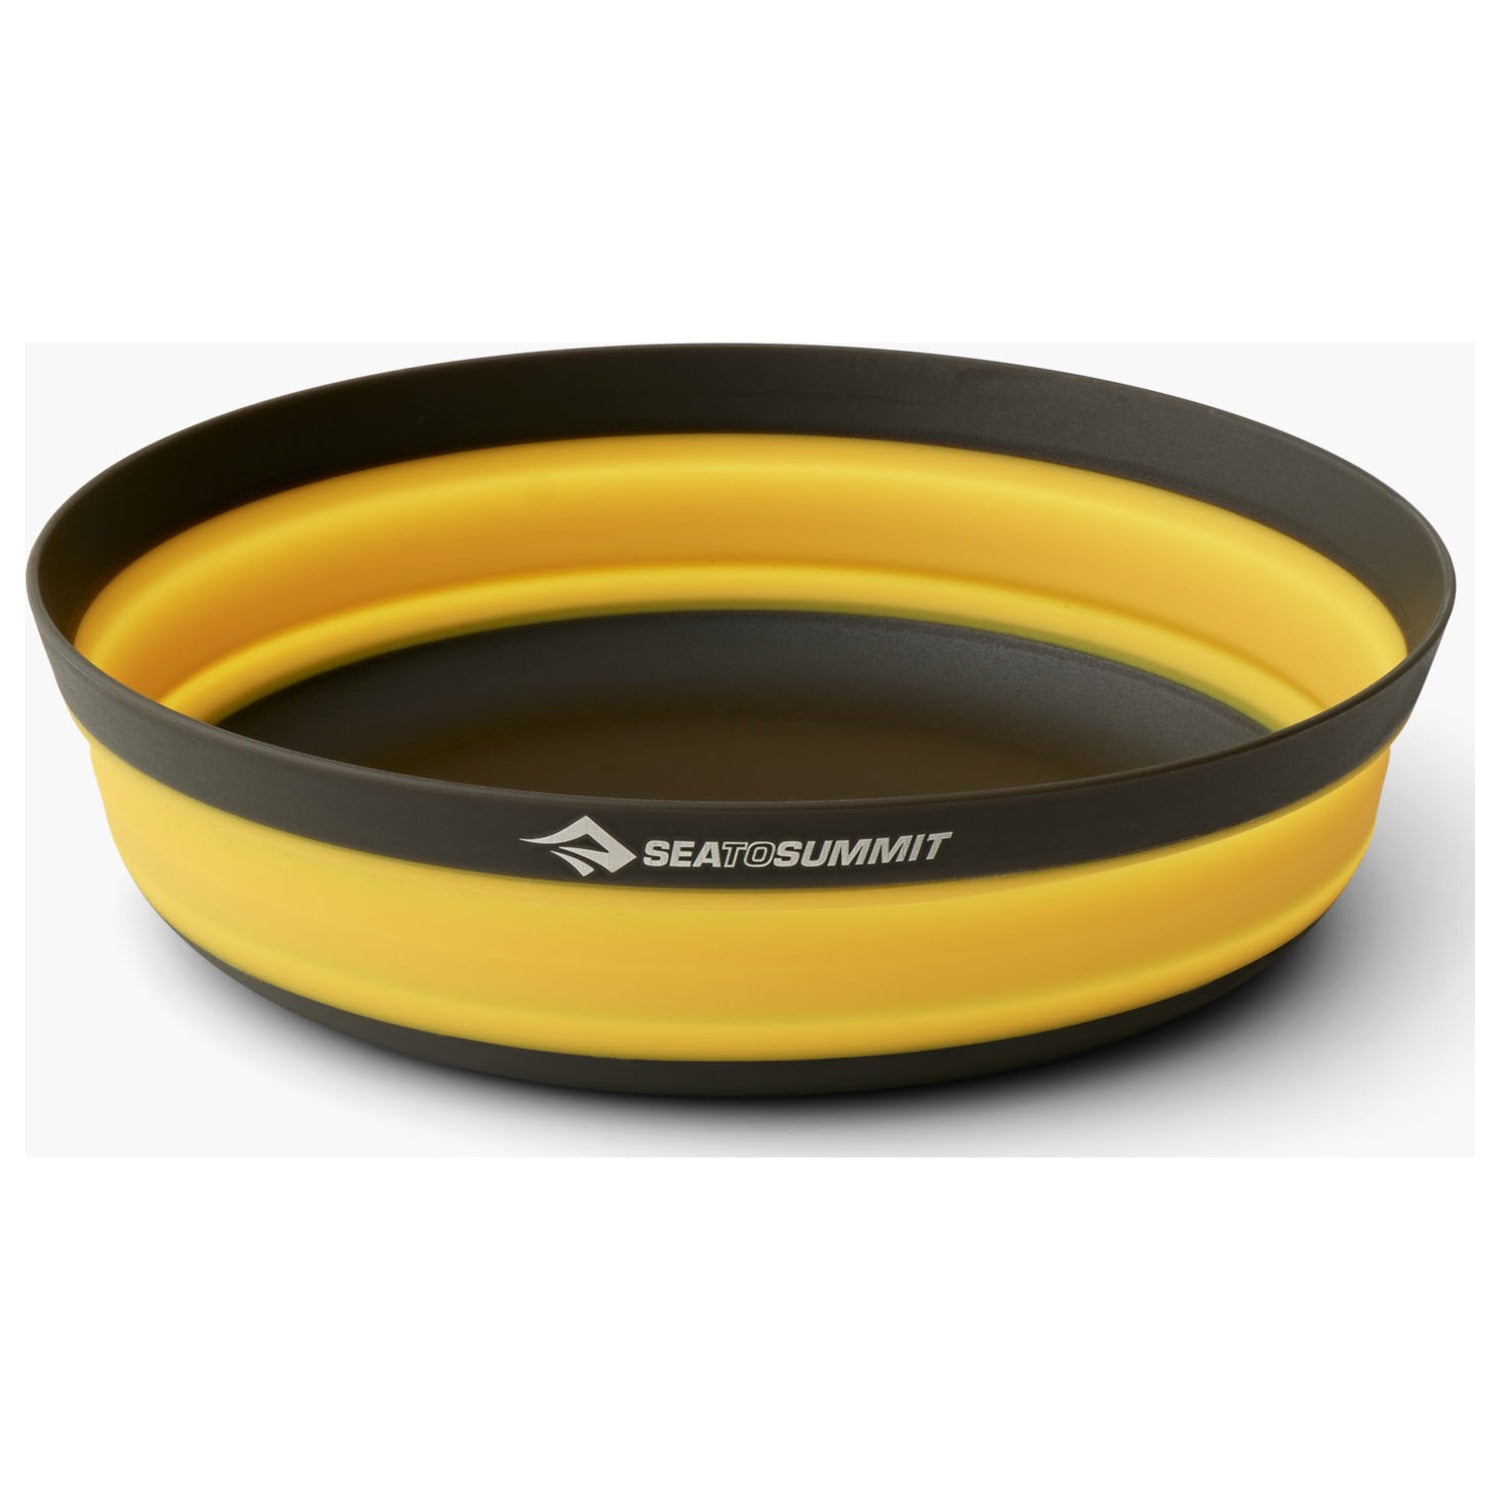 Sea to Summit Sea To Summit Frontier Collapsible Bowl - Medium or Large